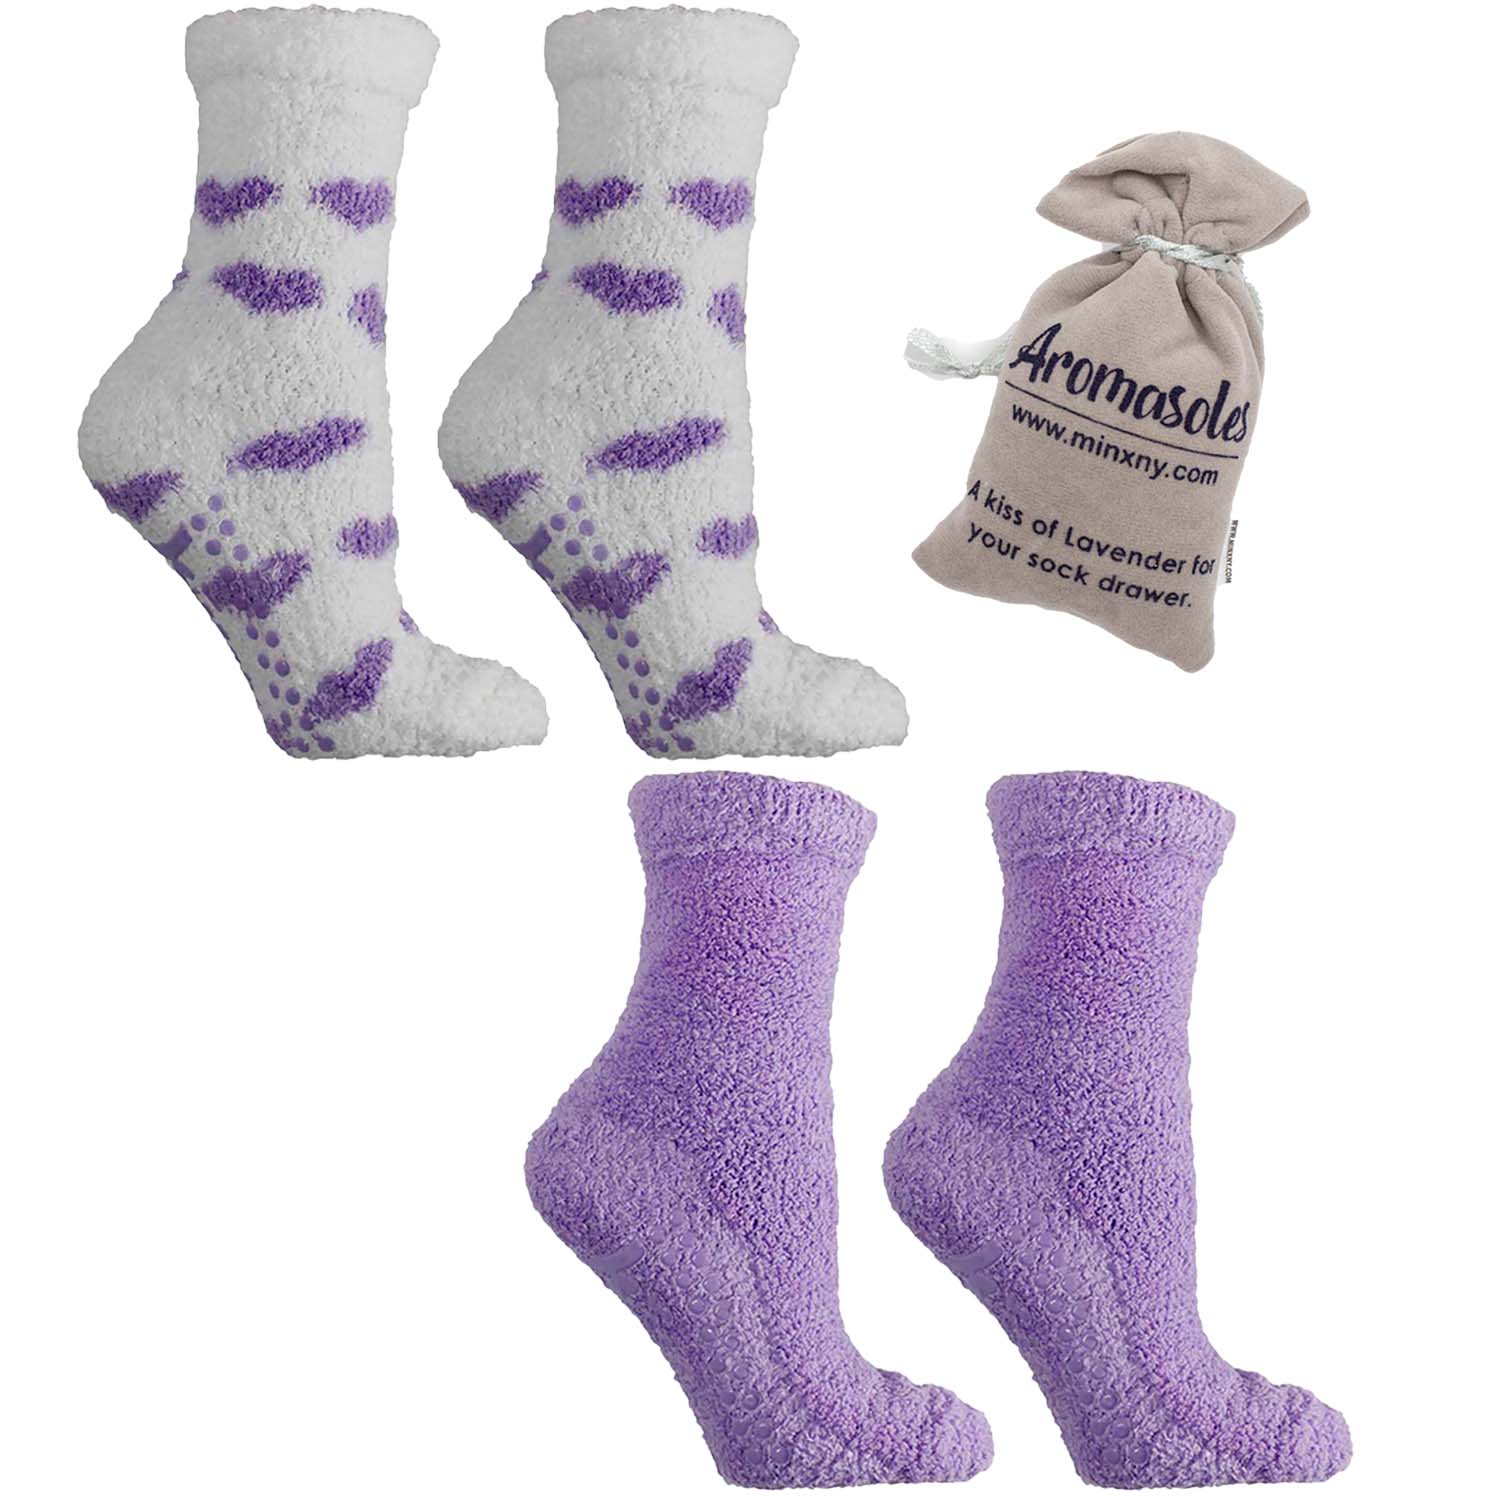 2 Pairs - Non-Skid Chenille Fuzzy Lavender Infused Slipper Socks with Lavender Sachet